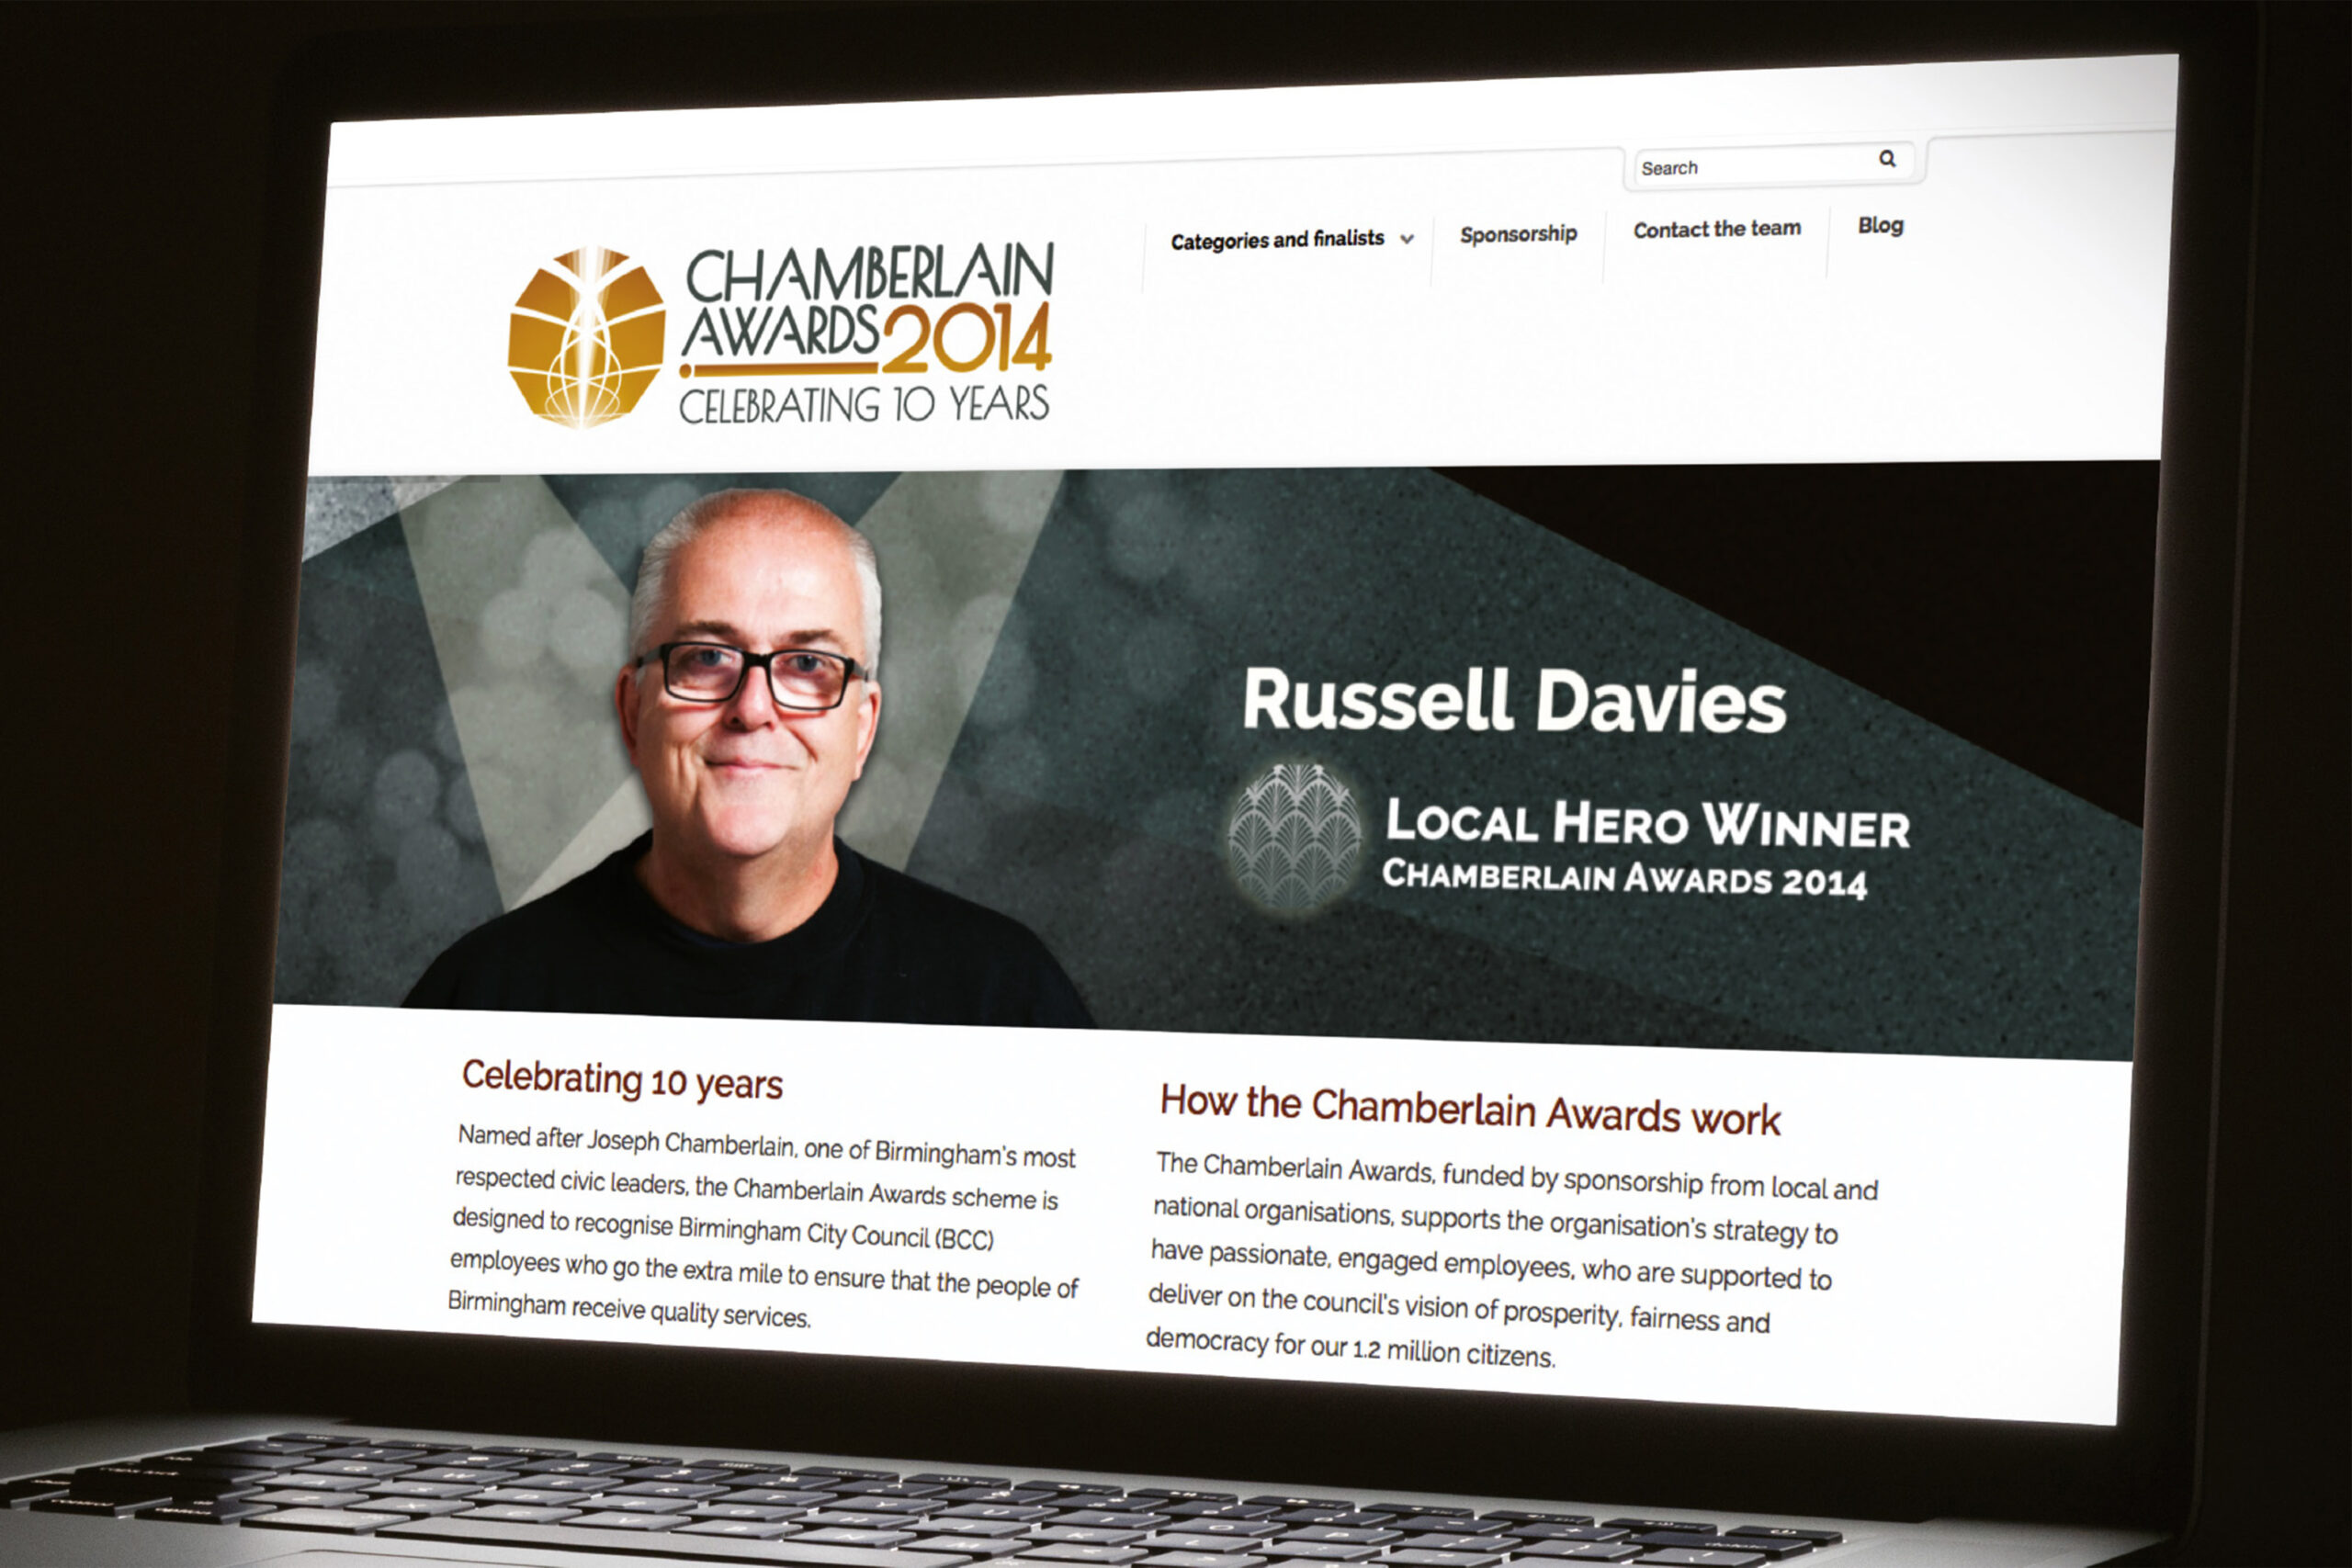 The Chamberlain Awards 2014 website displayed on a laptop in a darkened room. The website displays an image of 'Local Hero' award winner Russell Davies, above text explaining the history of the Chamberlain Awards scheme